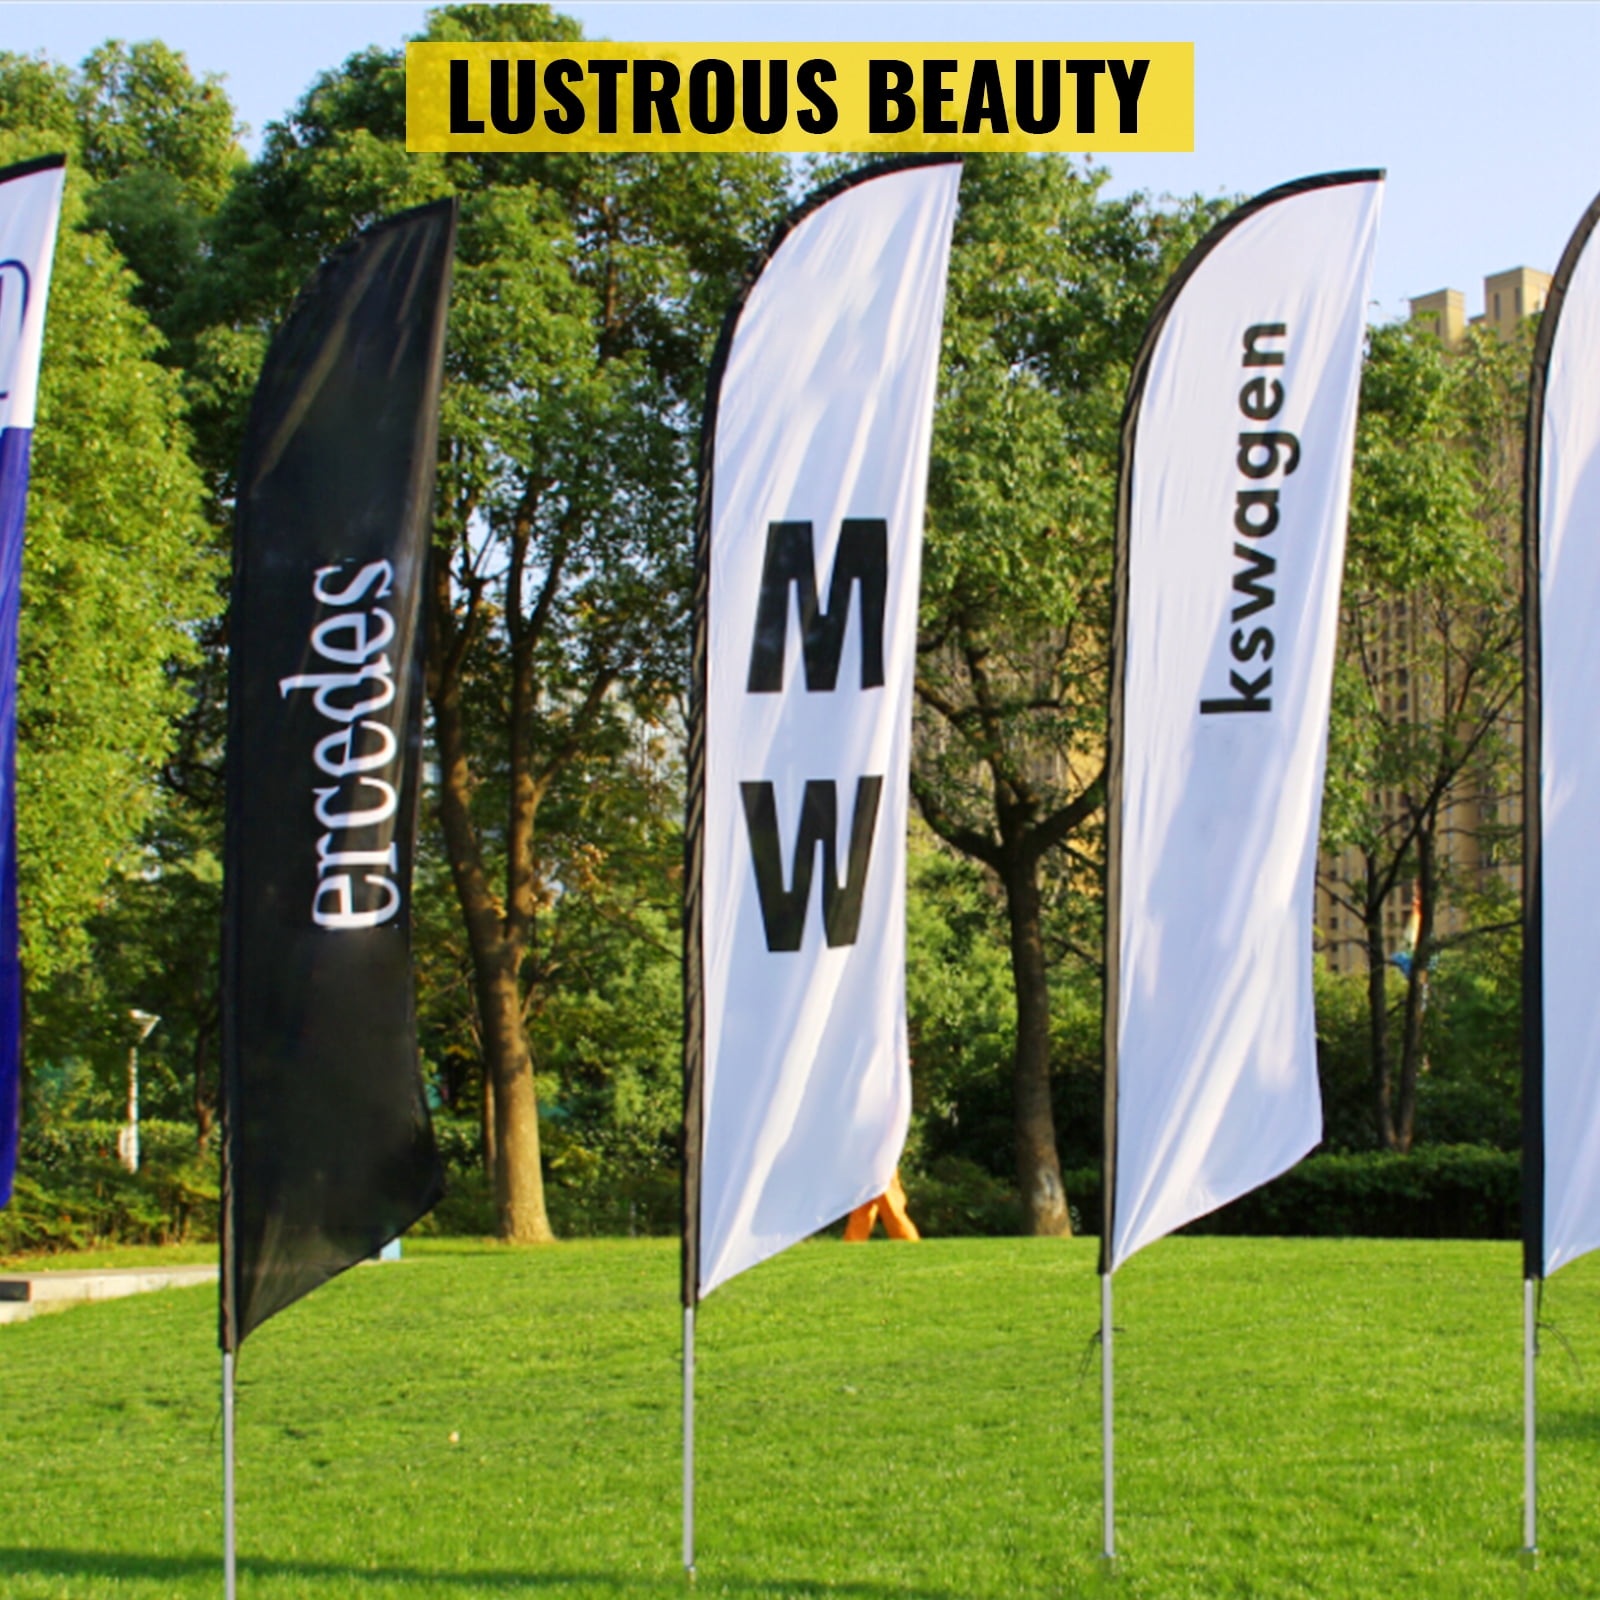 BEAUTY SPA FULL SERVICE Windless Full Curve Top Advertising Feather Swooper Flag 